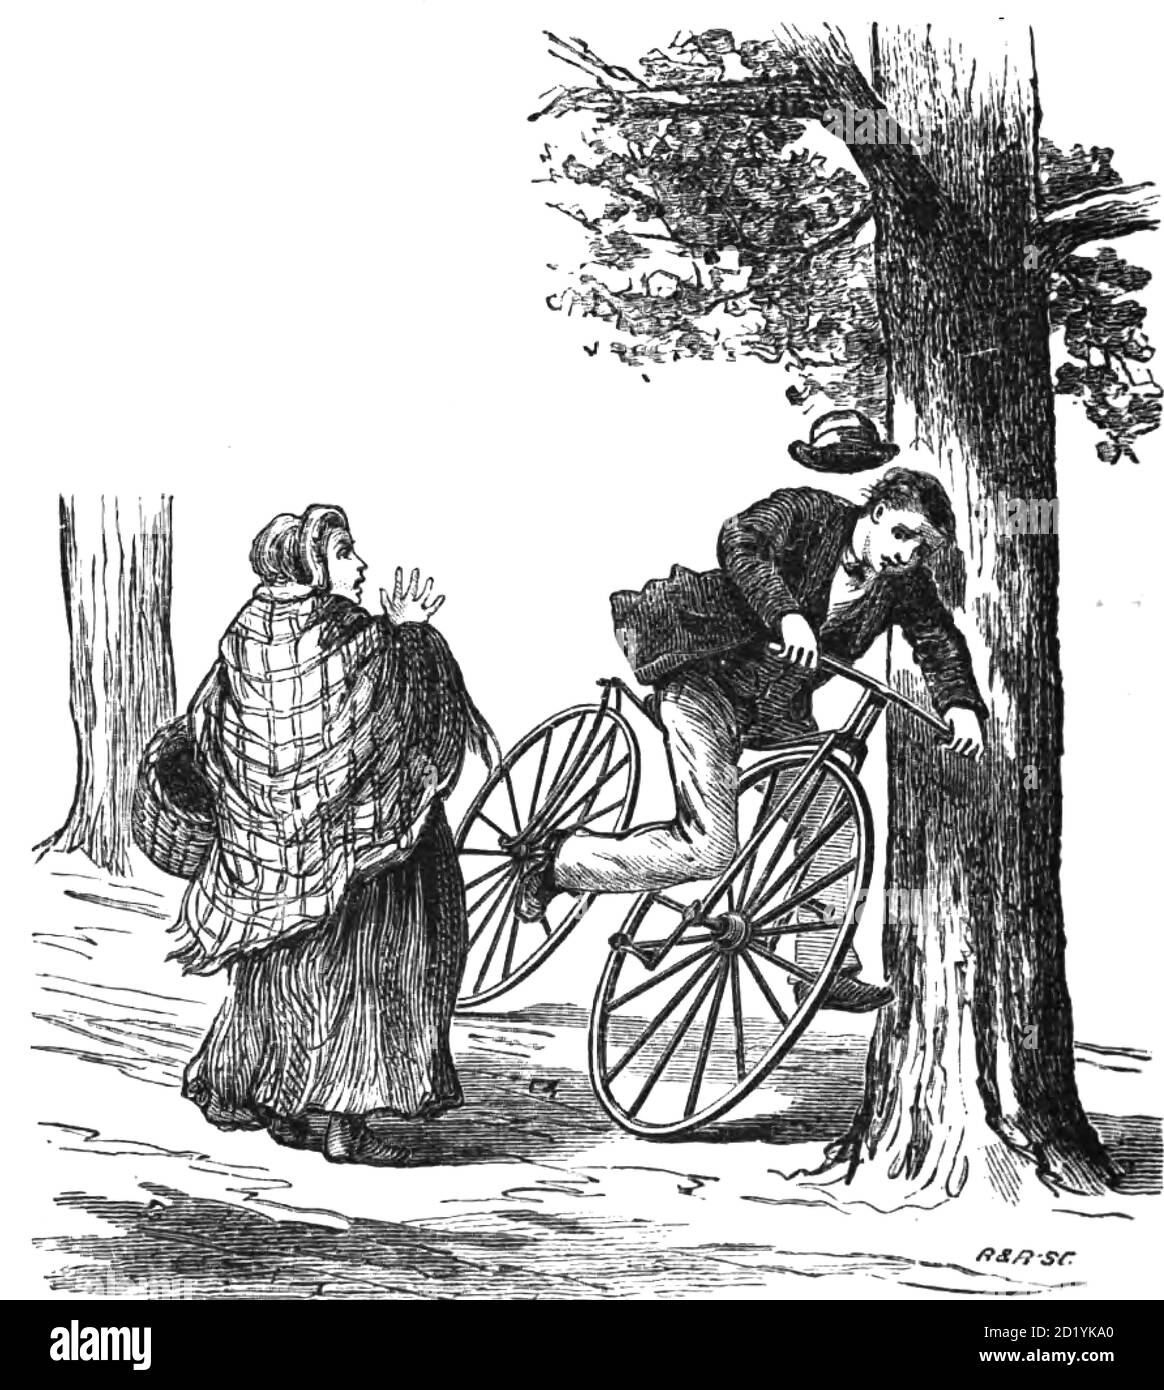 Rider and Velocipede crash into a tree from The American bicycler: a manual for the observer, the learner, and the expert by Pratt, Charles E. (Charles Eadward), 1845-1898. Publication date 1879. Publisher Boston, Houghton, Osgood and company Stock Photo